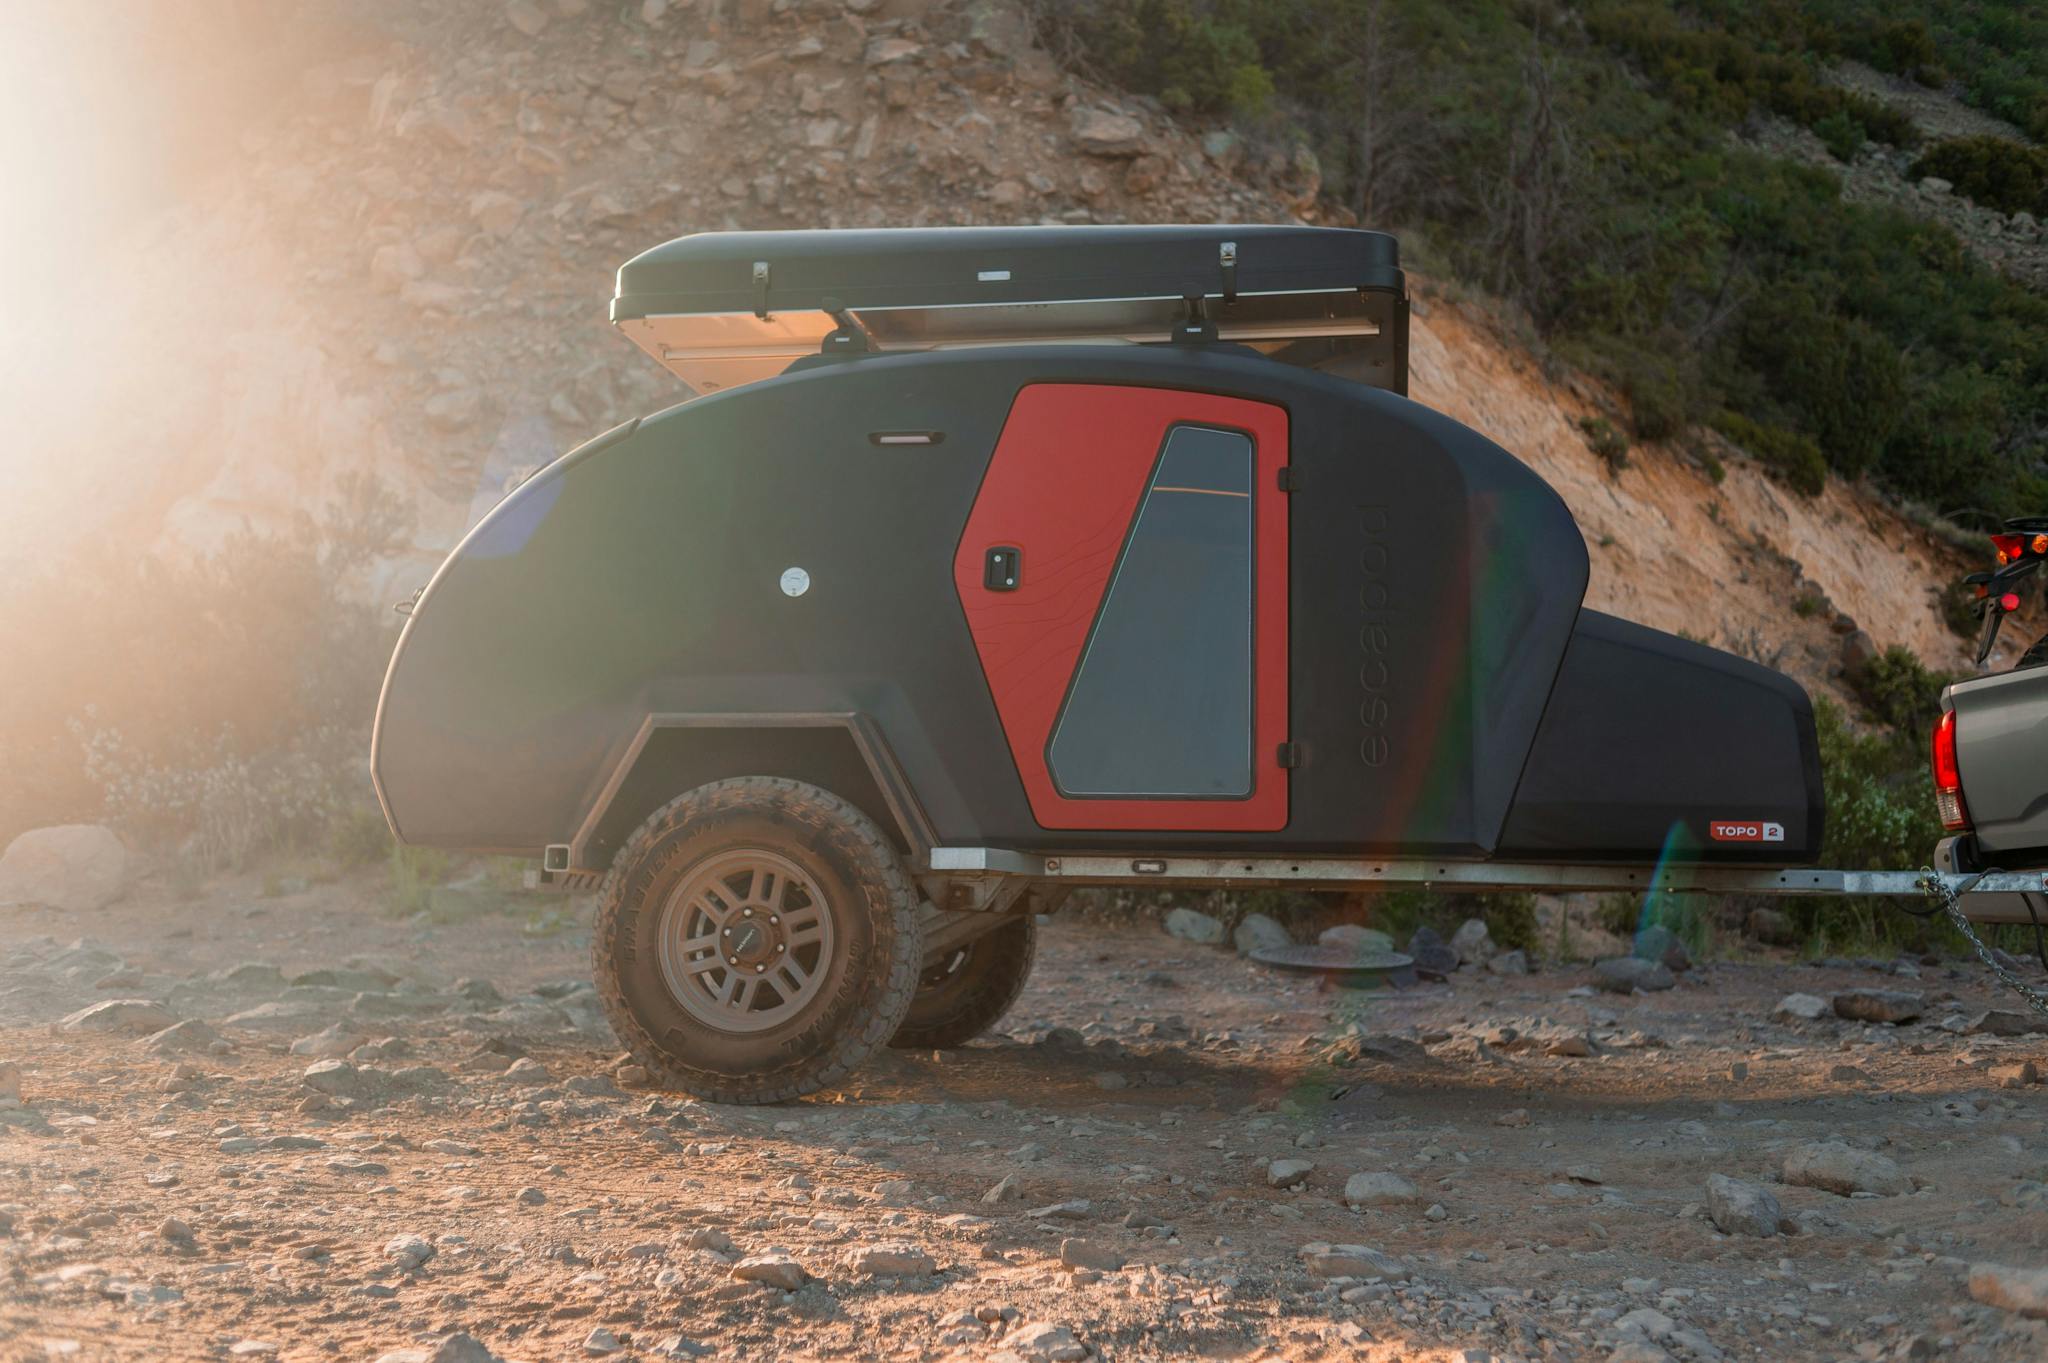 A teardrop camper with a rooftop tent mounted on top.